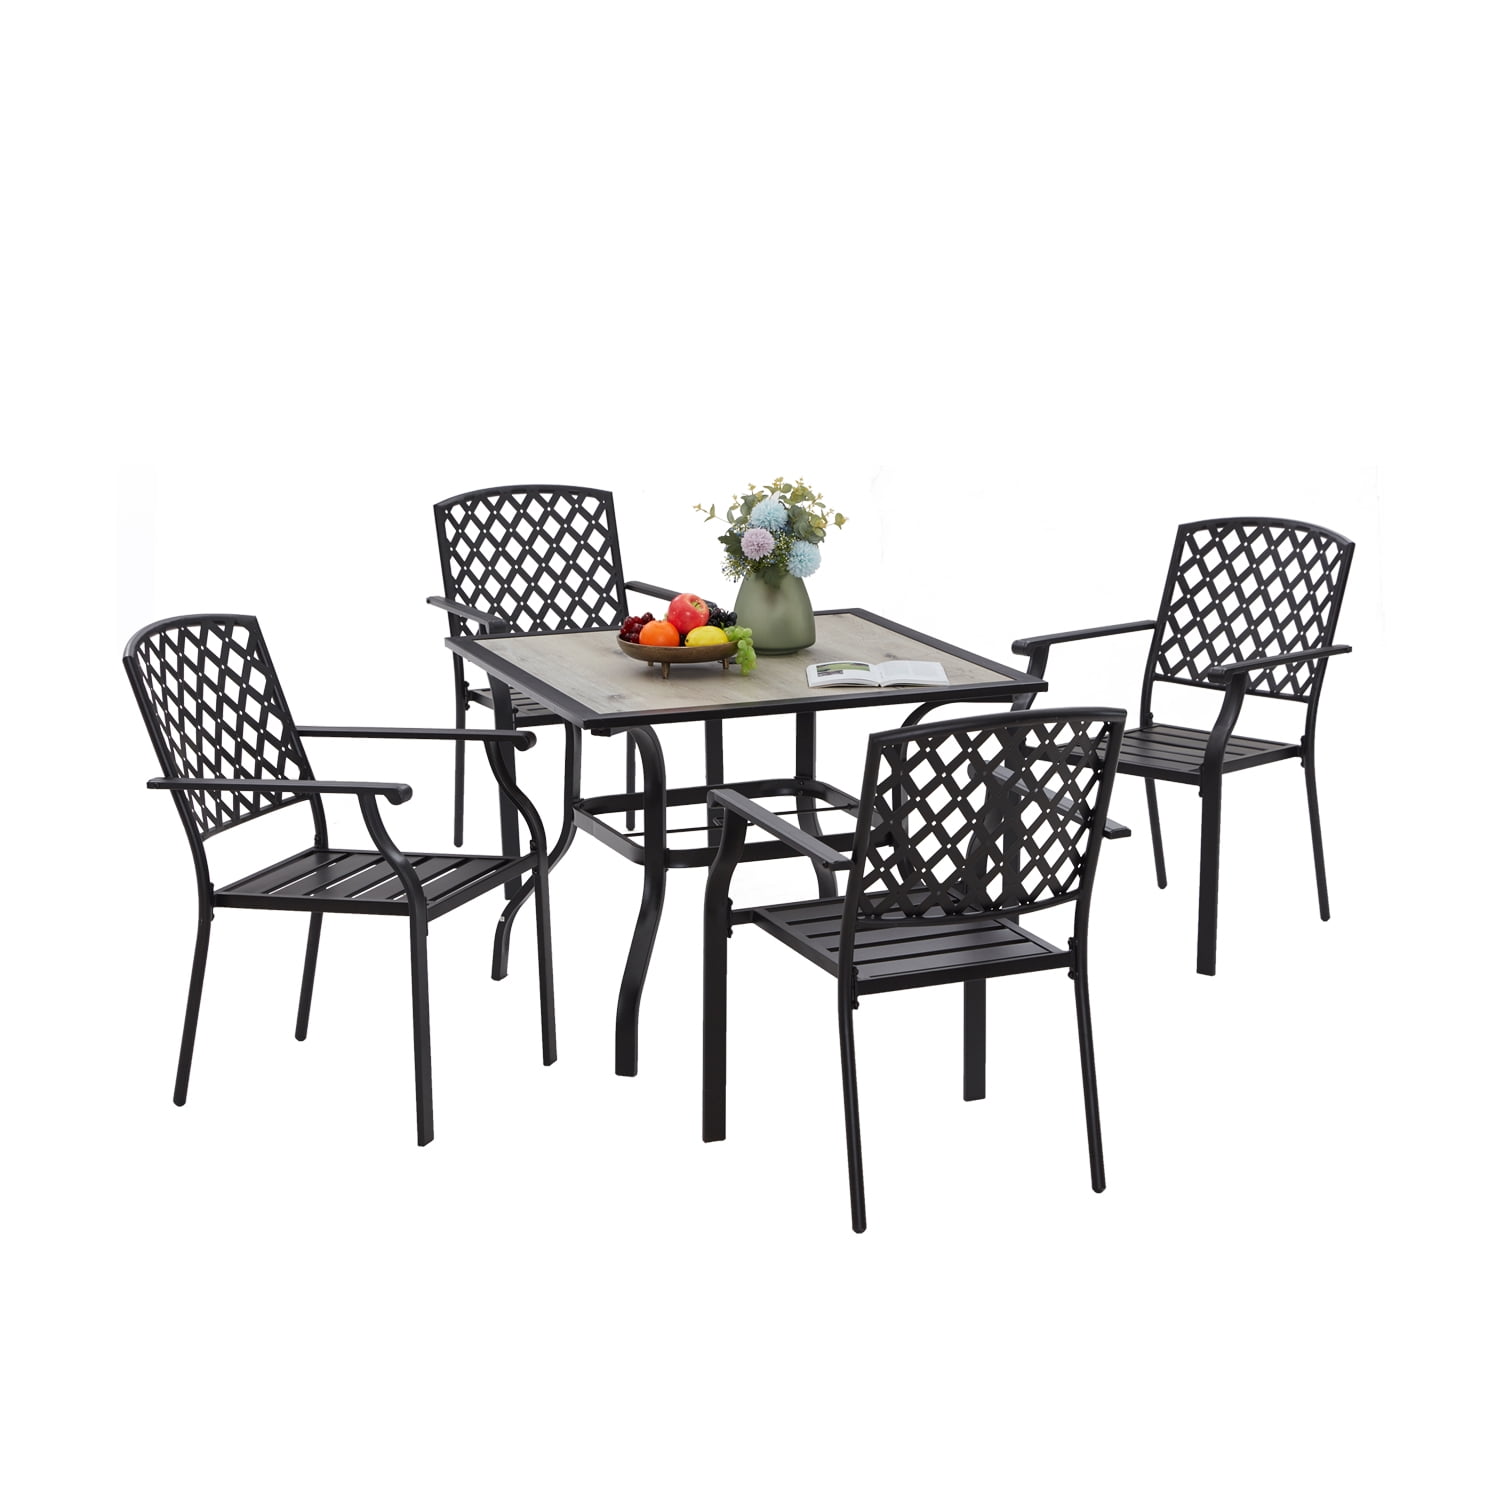 Vicllax Outdoor Swivel Dining Chairs Patio Furniture for Garden Porch Set for 4